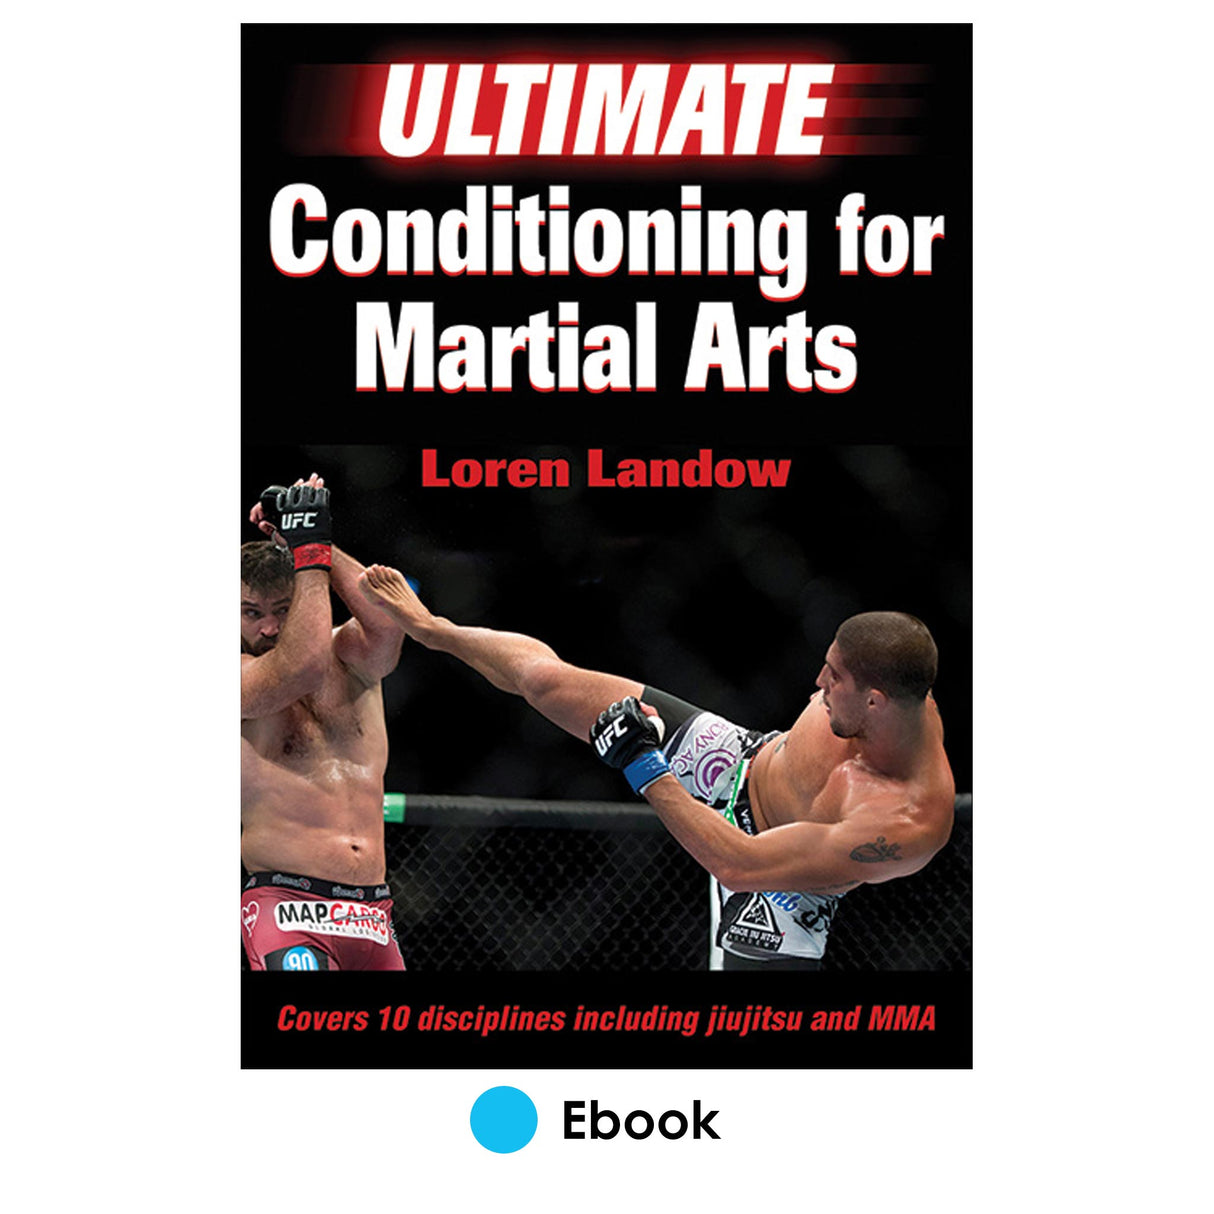 Ultimate Conditioning for Martial Arts PDF